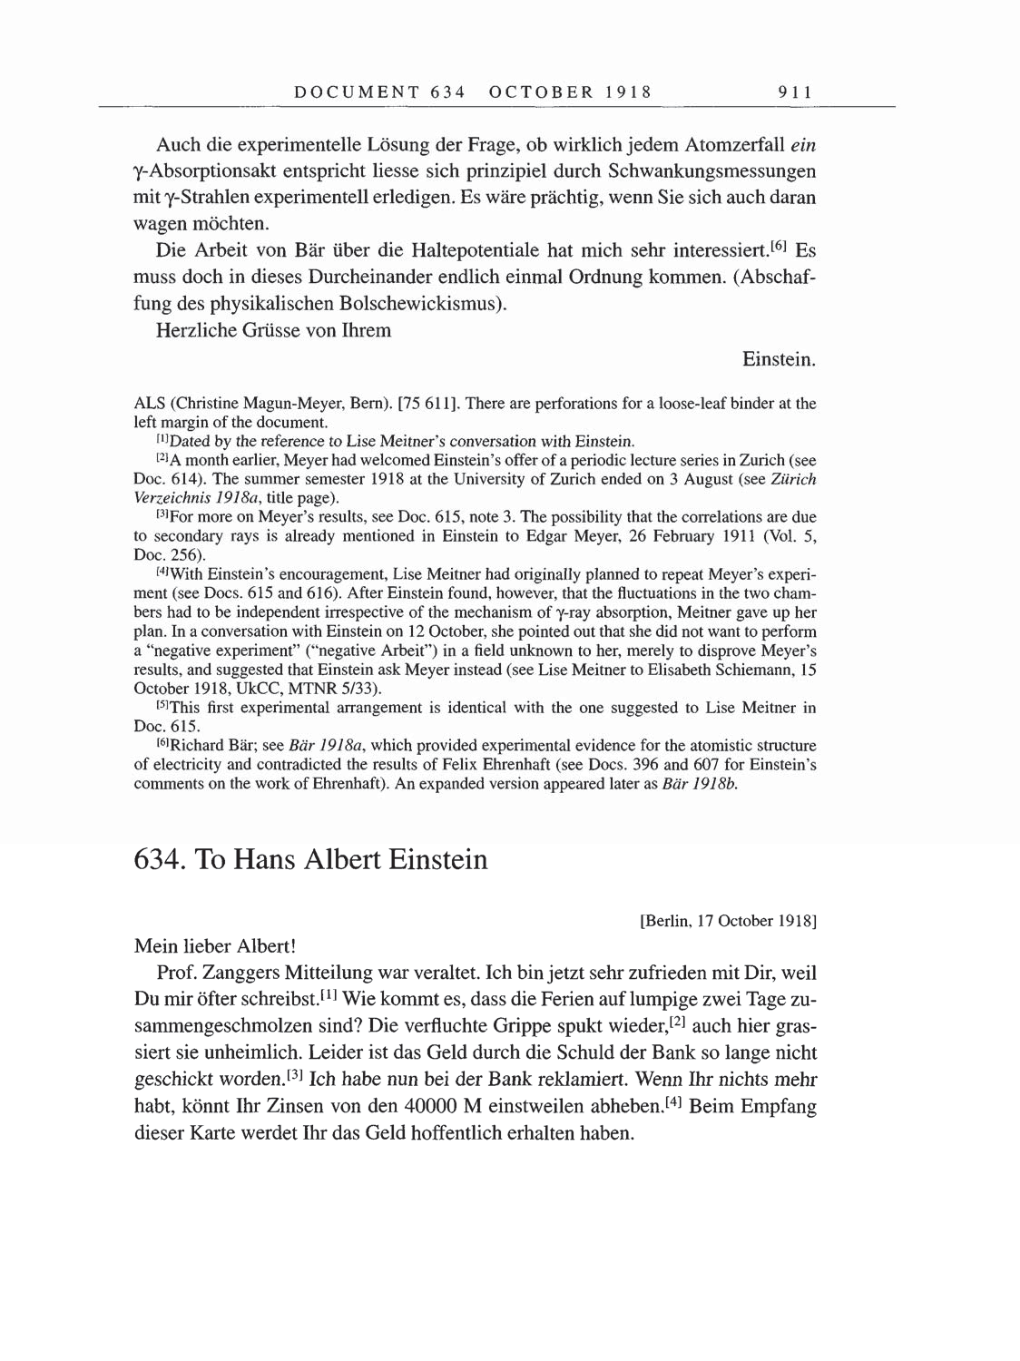 Volume 8, Part B: The Berlin Years: Correspondence 1918 page 911